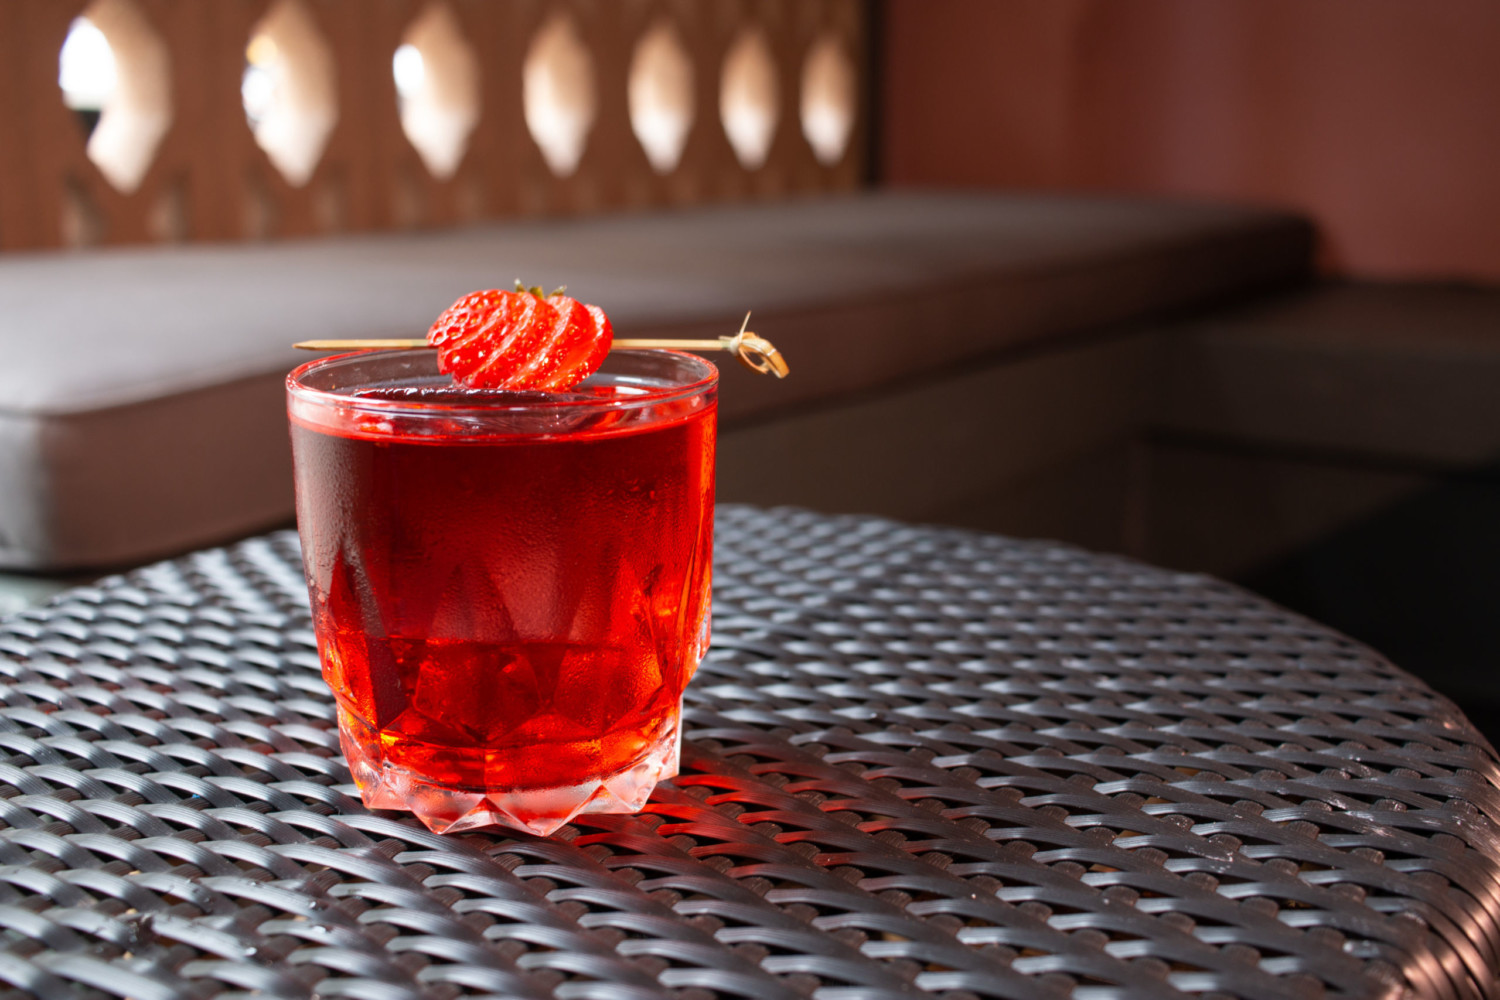 A red drink in a clear glass topped with sliced strawberries. It is photographed on a brown woven table.